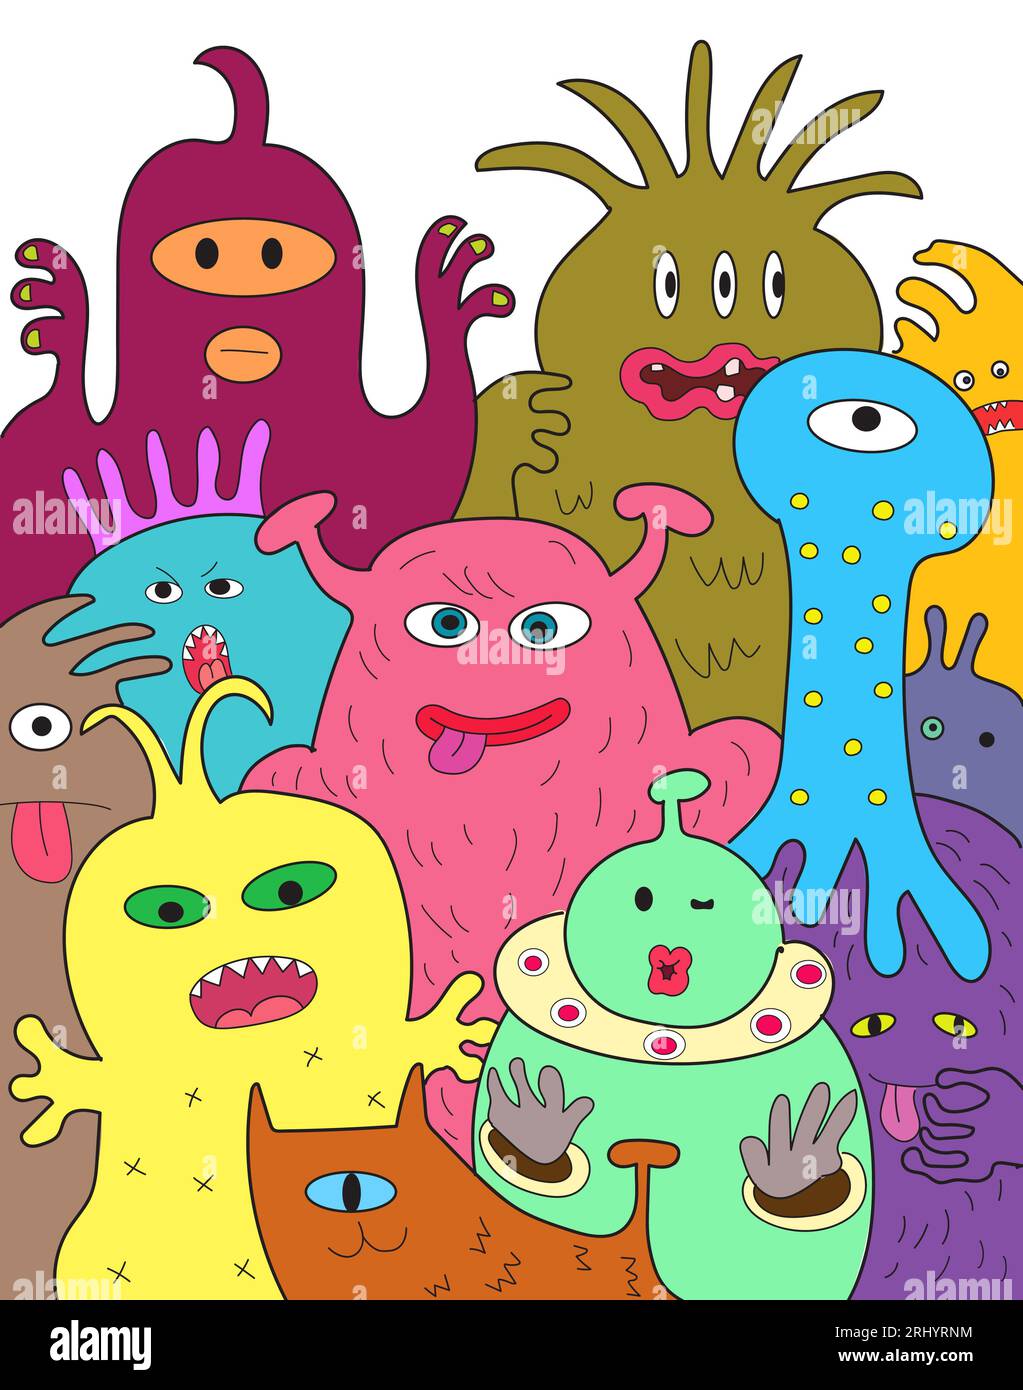 Group of cute funny alien monsters celebrate Halloween holiday together. Happy colorful characters cartoon drawing. Stock Photo